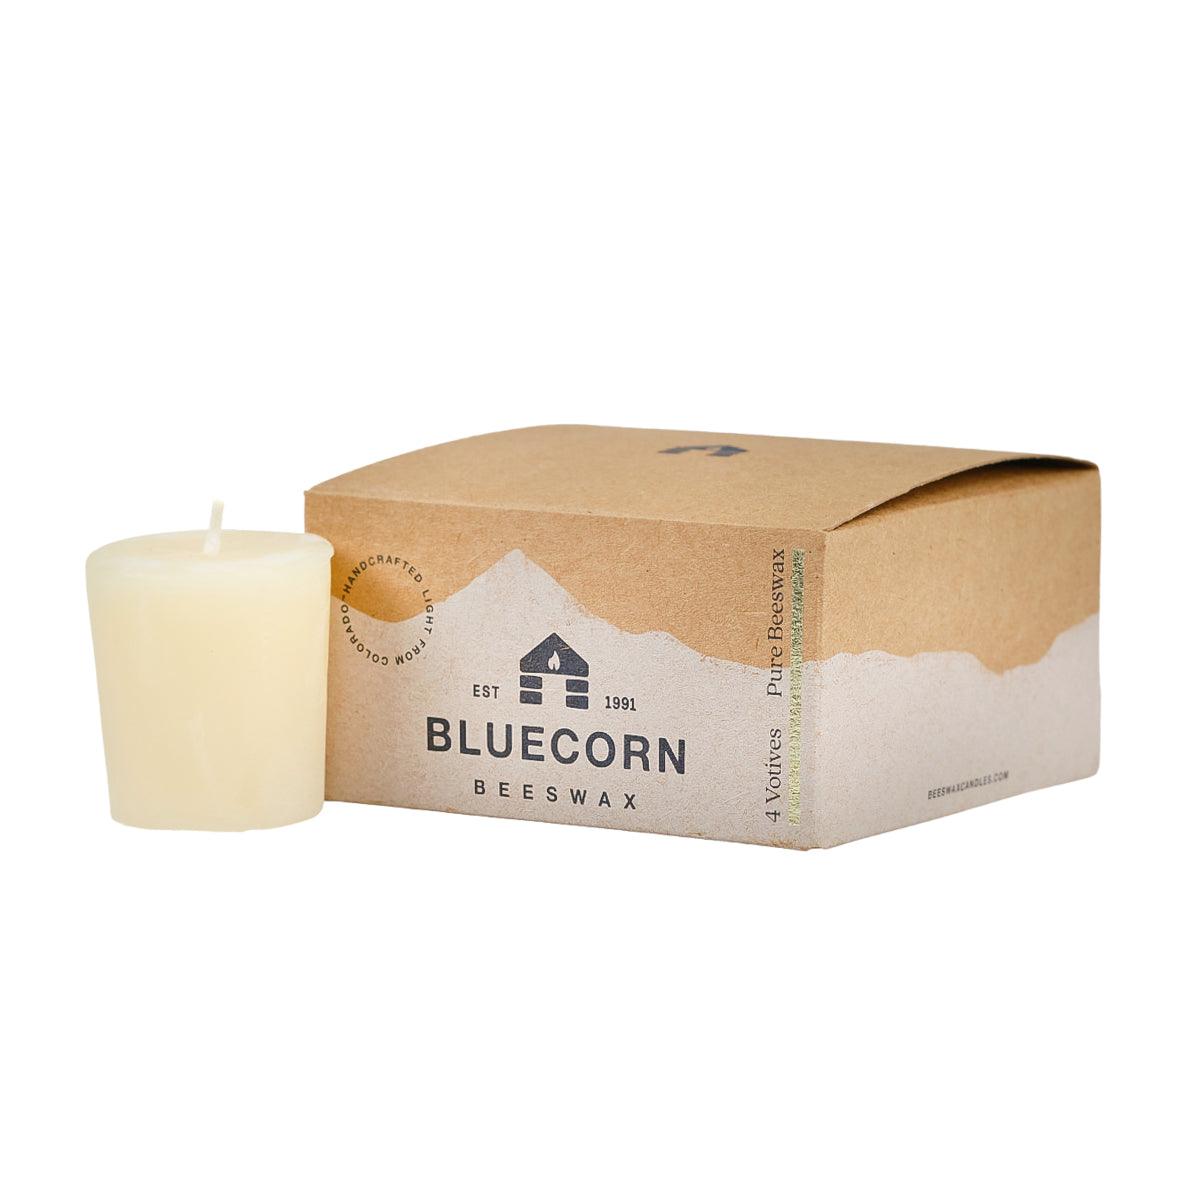 A single beeswax votive in the color ivory, sitting next to a closed 4-pack votive box